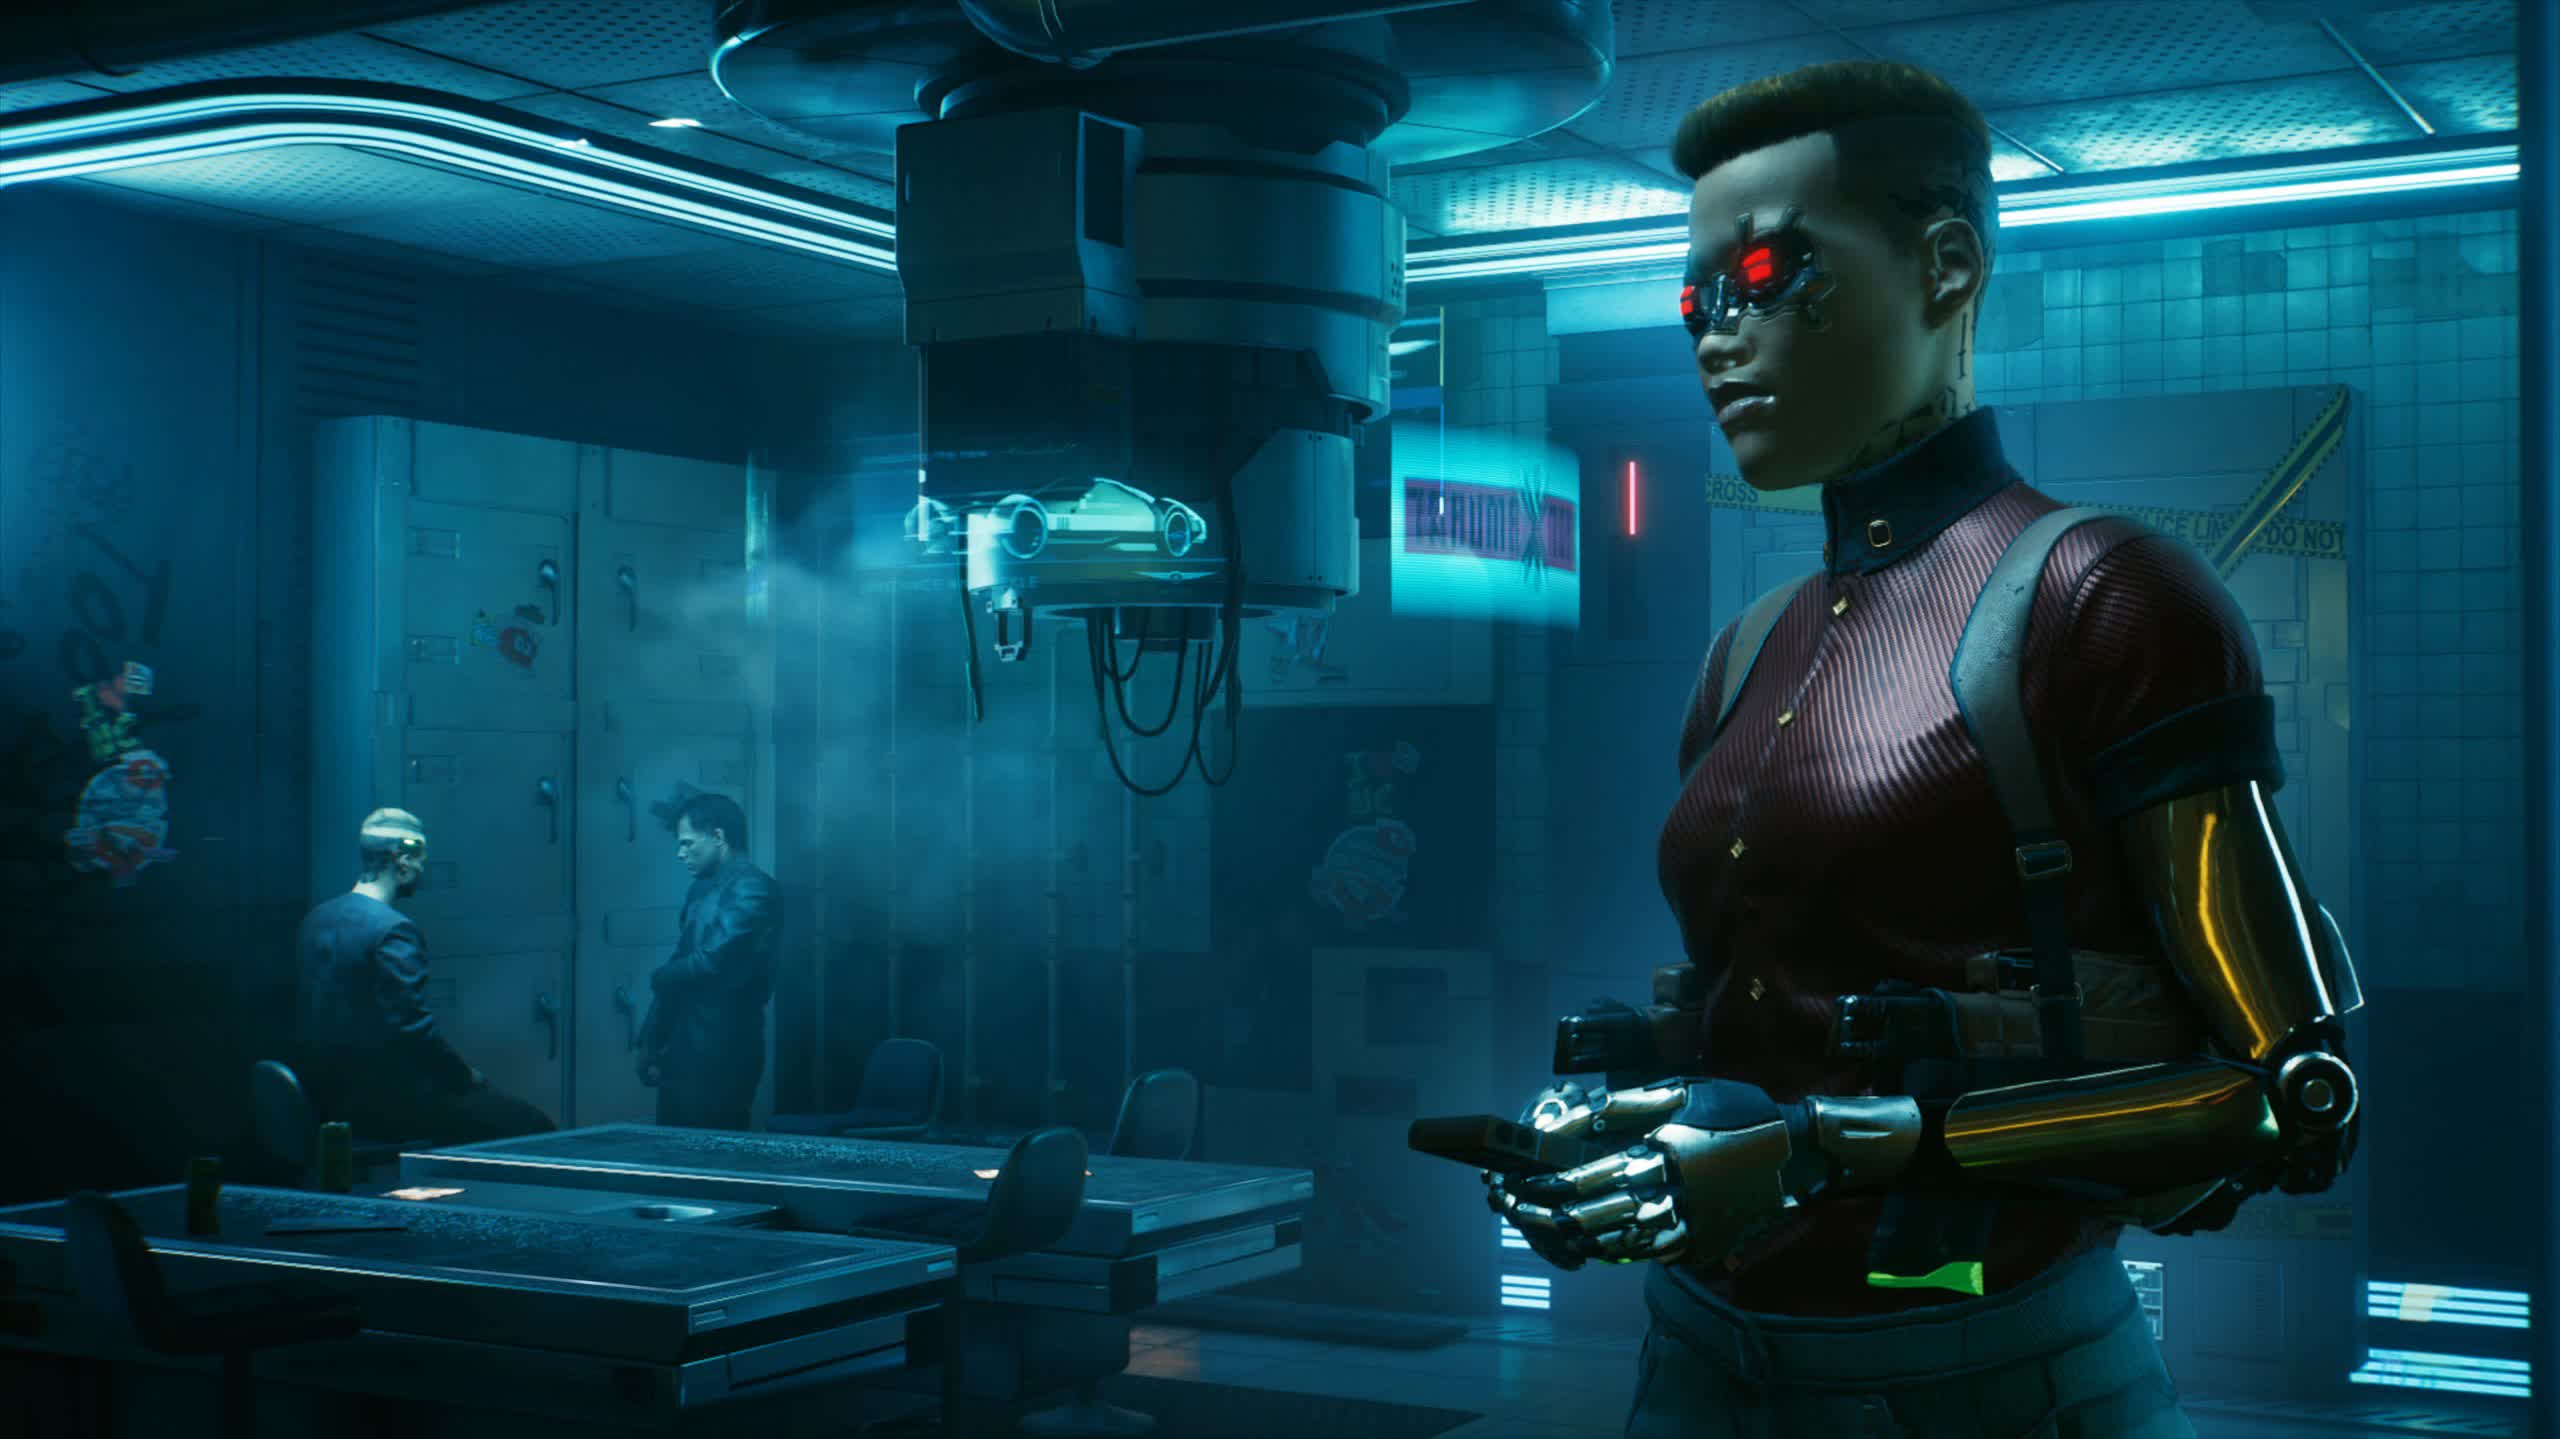 Playing Cyberpunk 2077 on first-gen PS4 and Xbox One units is proving troublesome